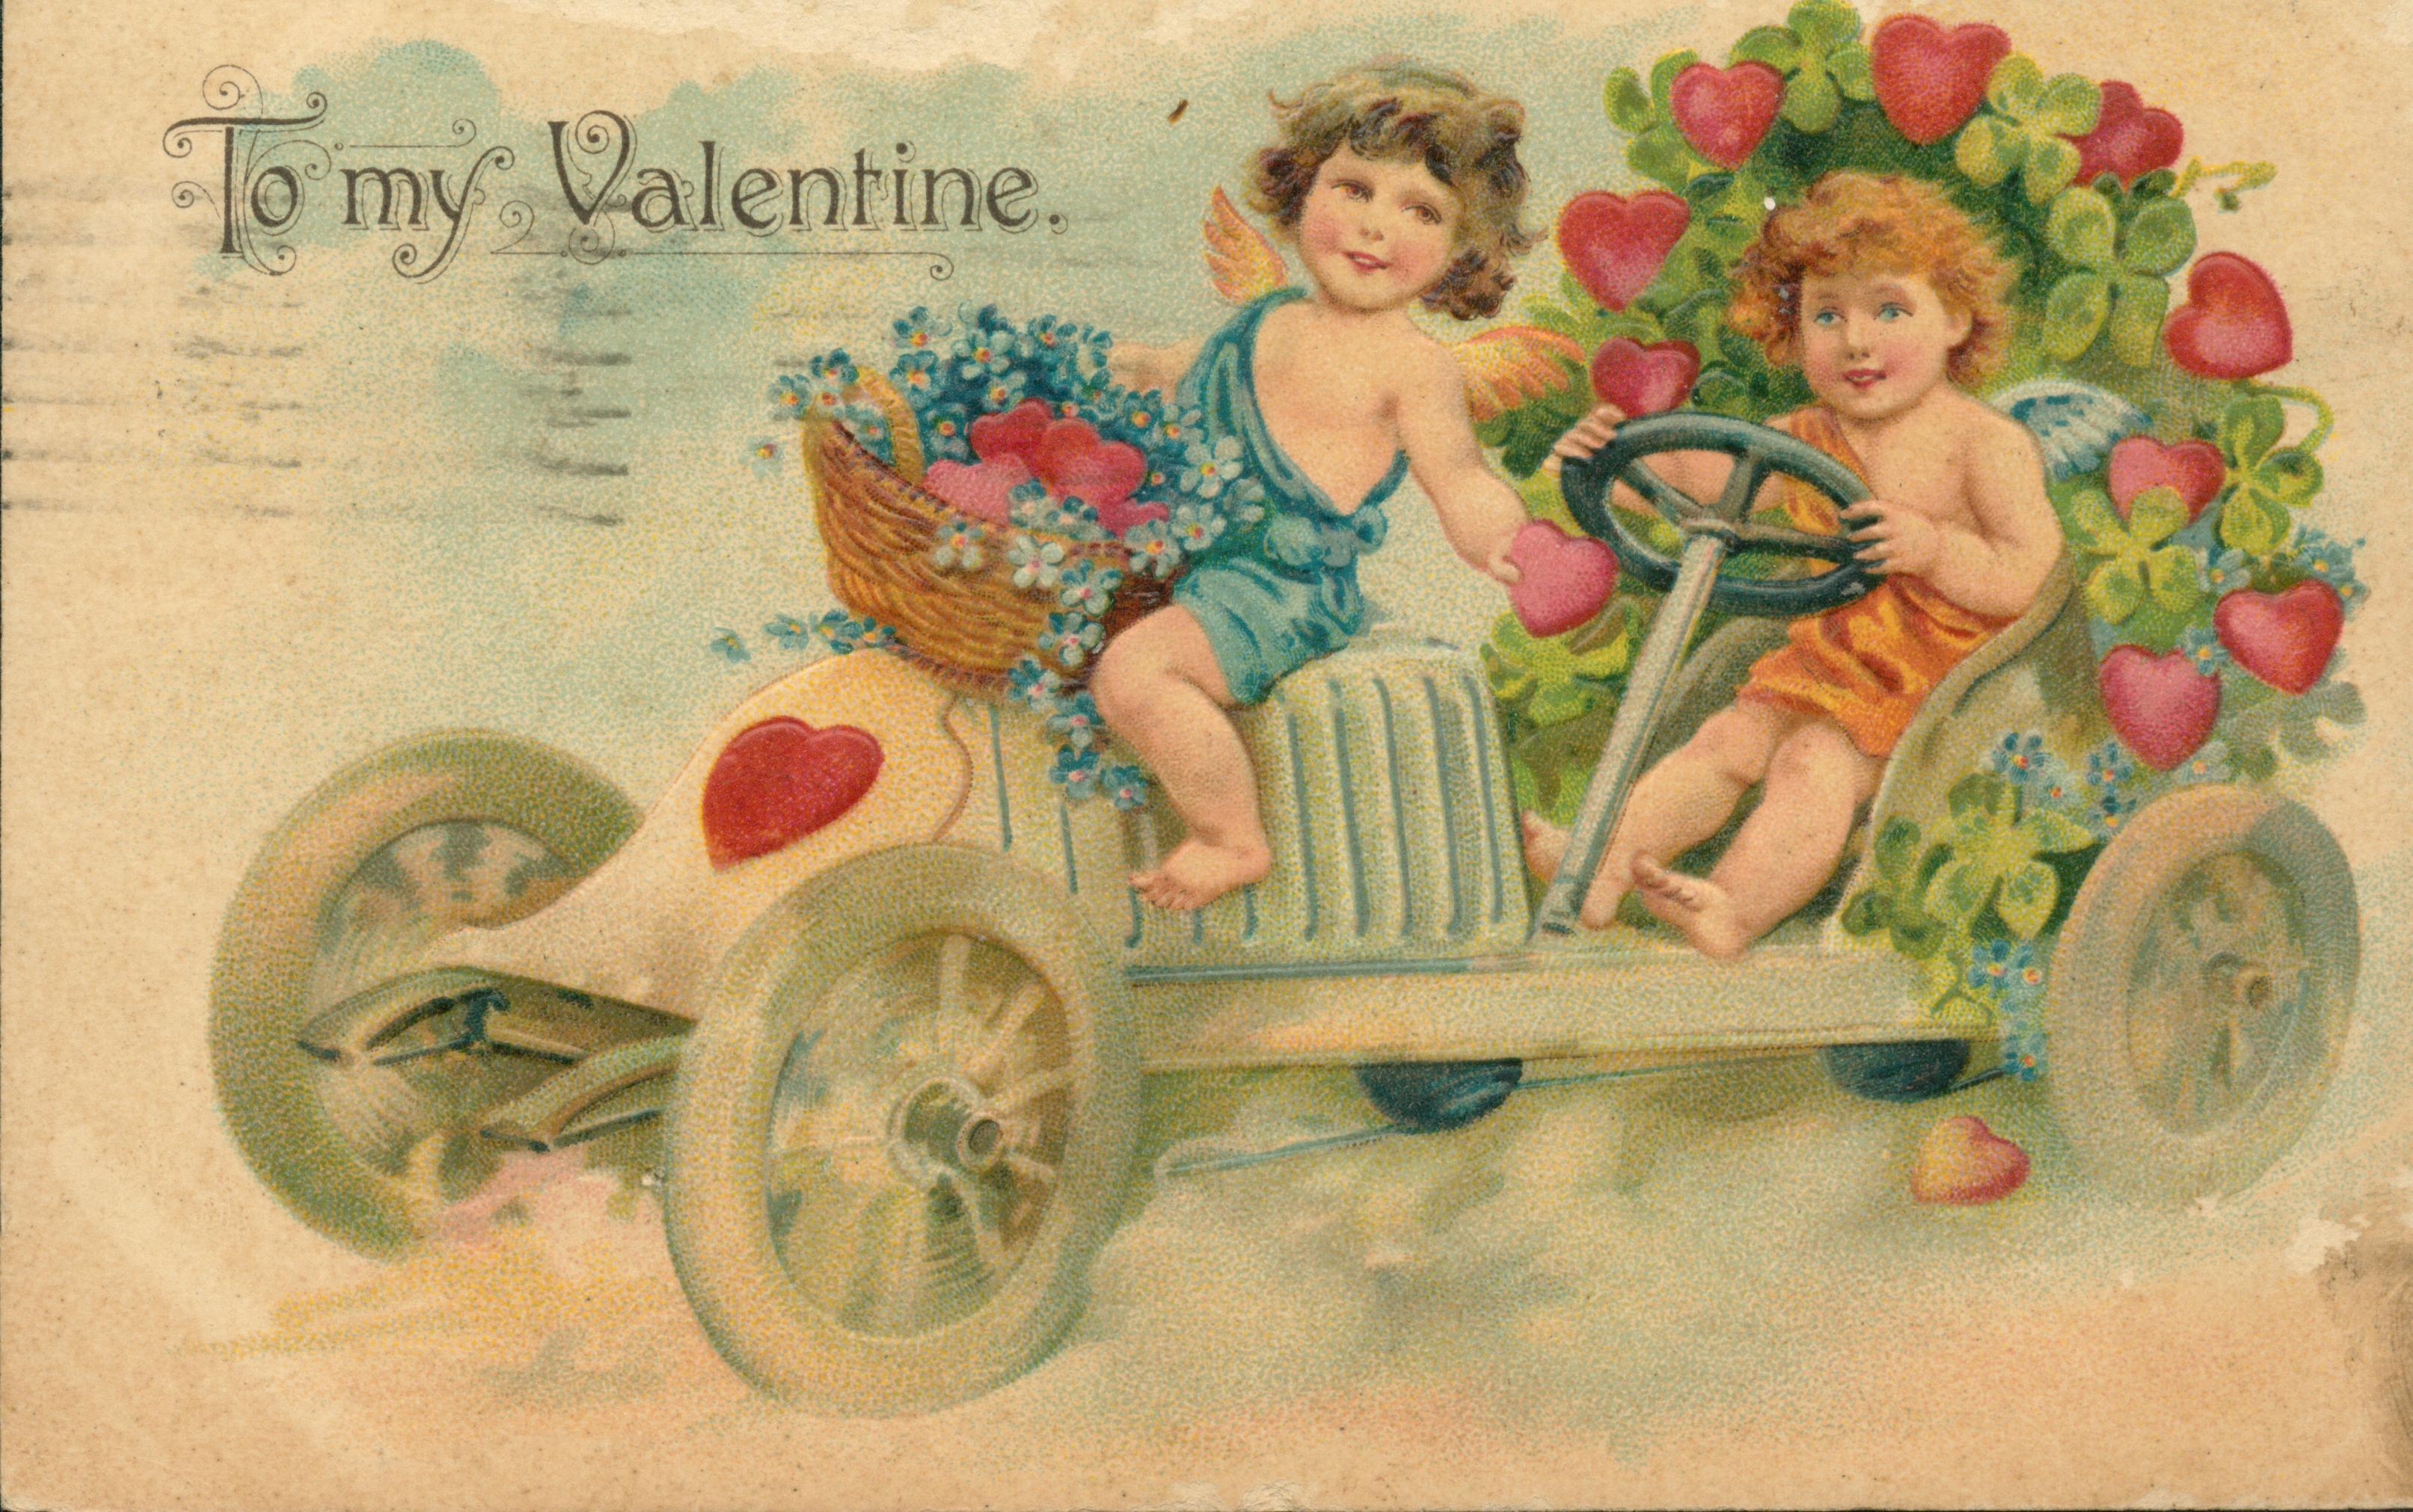 Shows two children festooned with flowers and clover driving a car